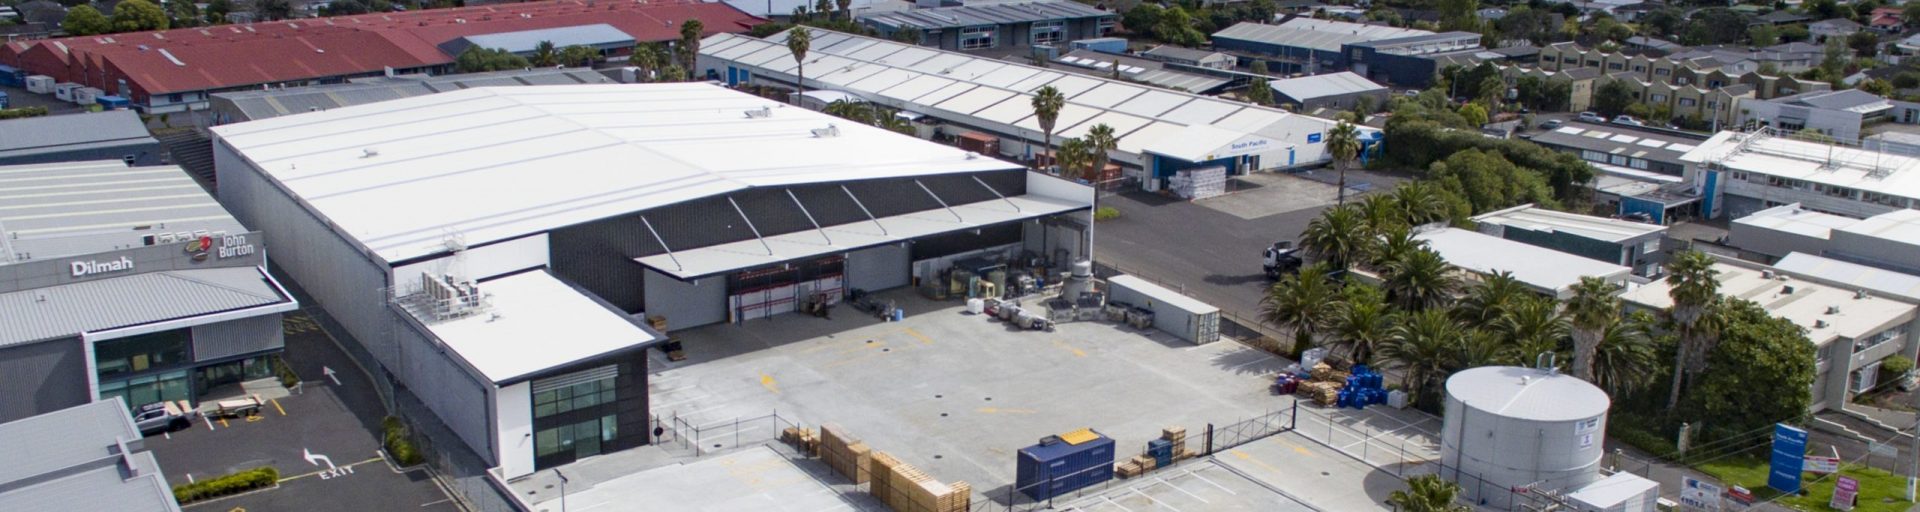 Coresteel Buildings’ construction project for business growth